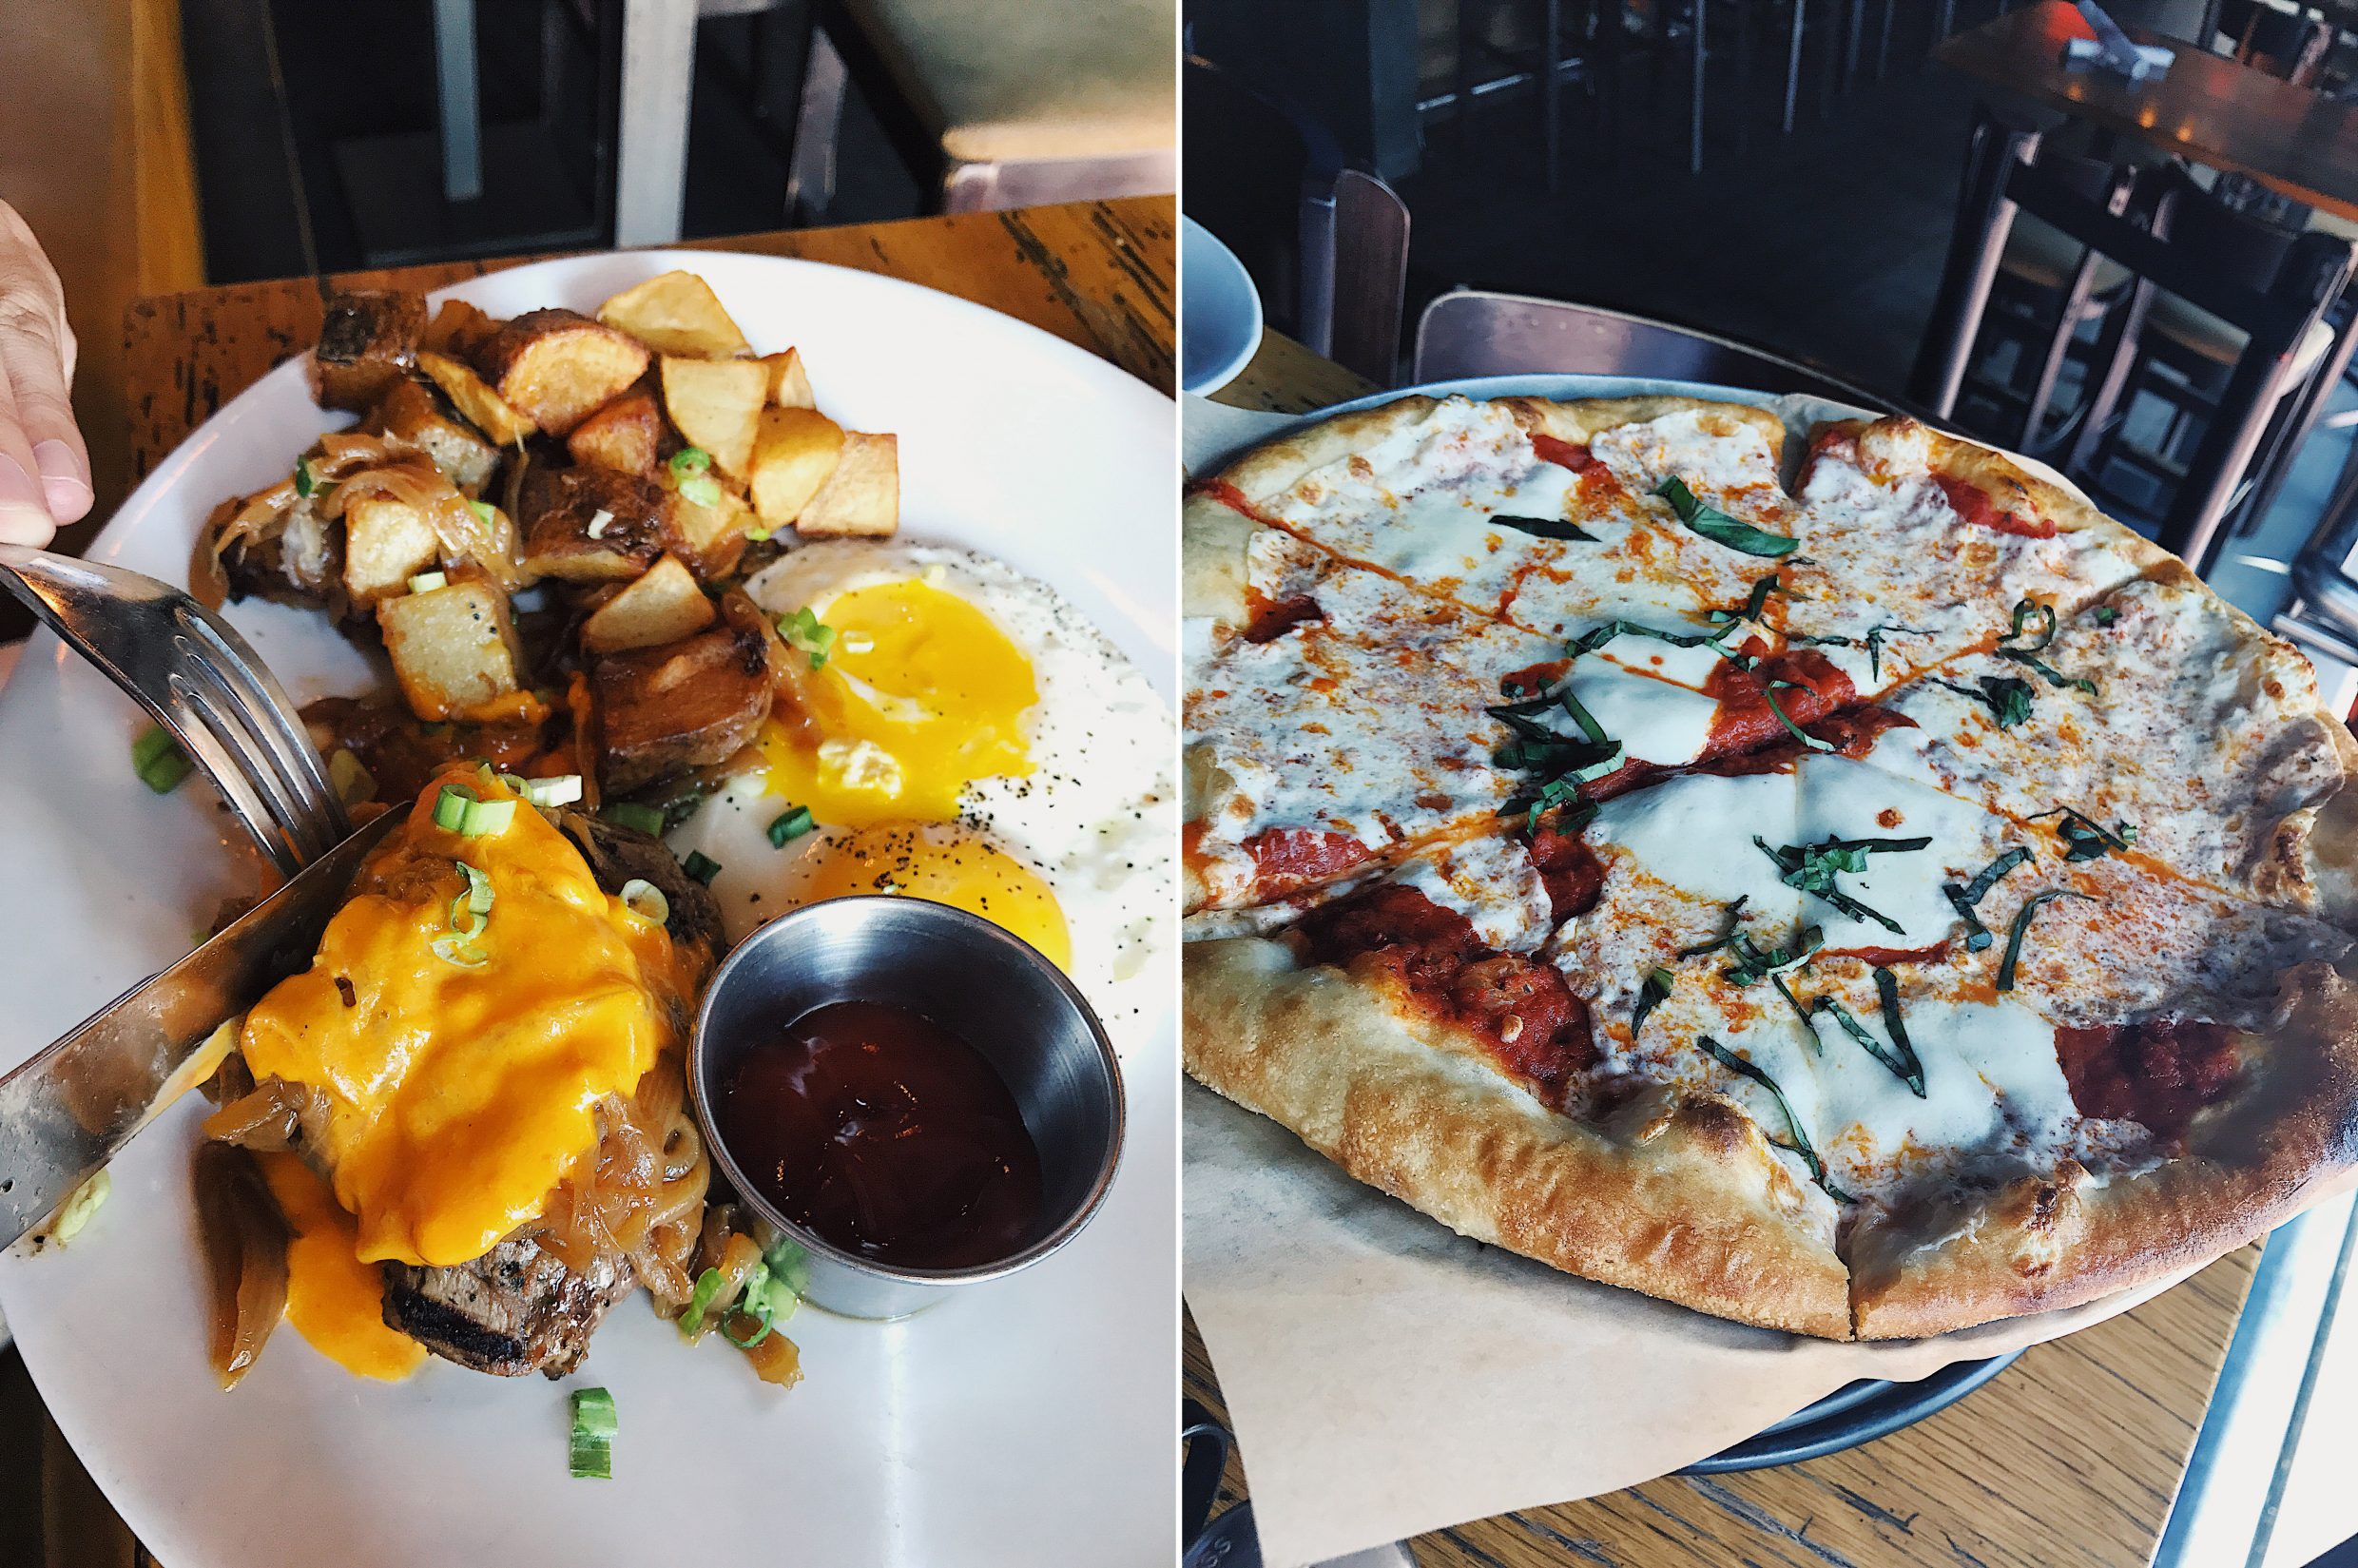 City Tap House : Steak & Eggs and Margherita Pizza | A weekend in Washington, D.C. | Travel and Food Guide